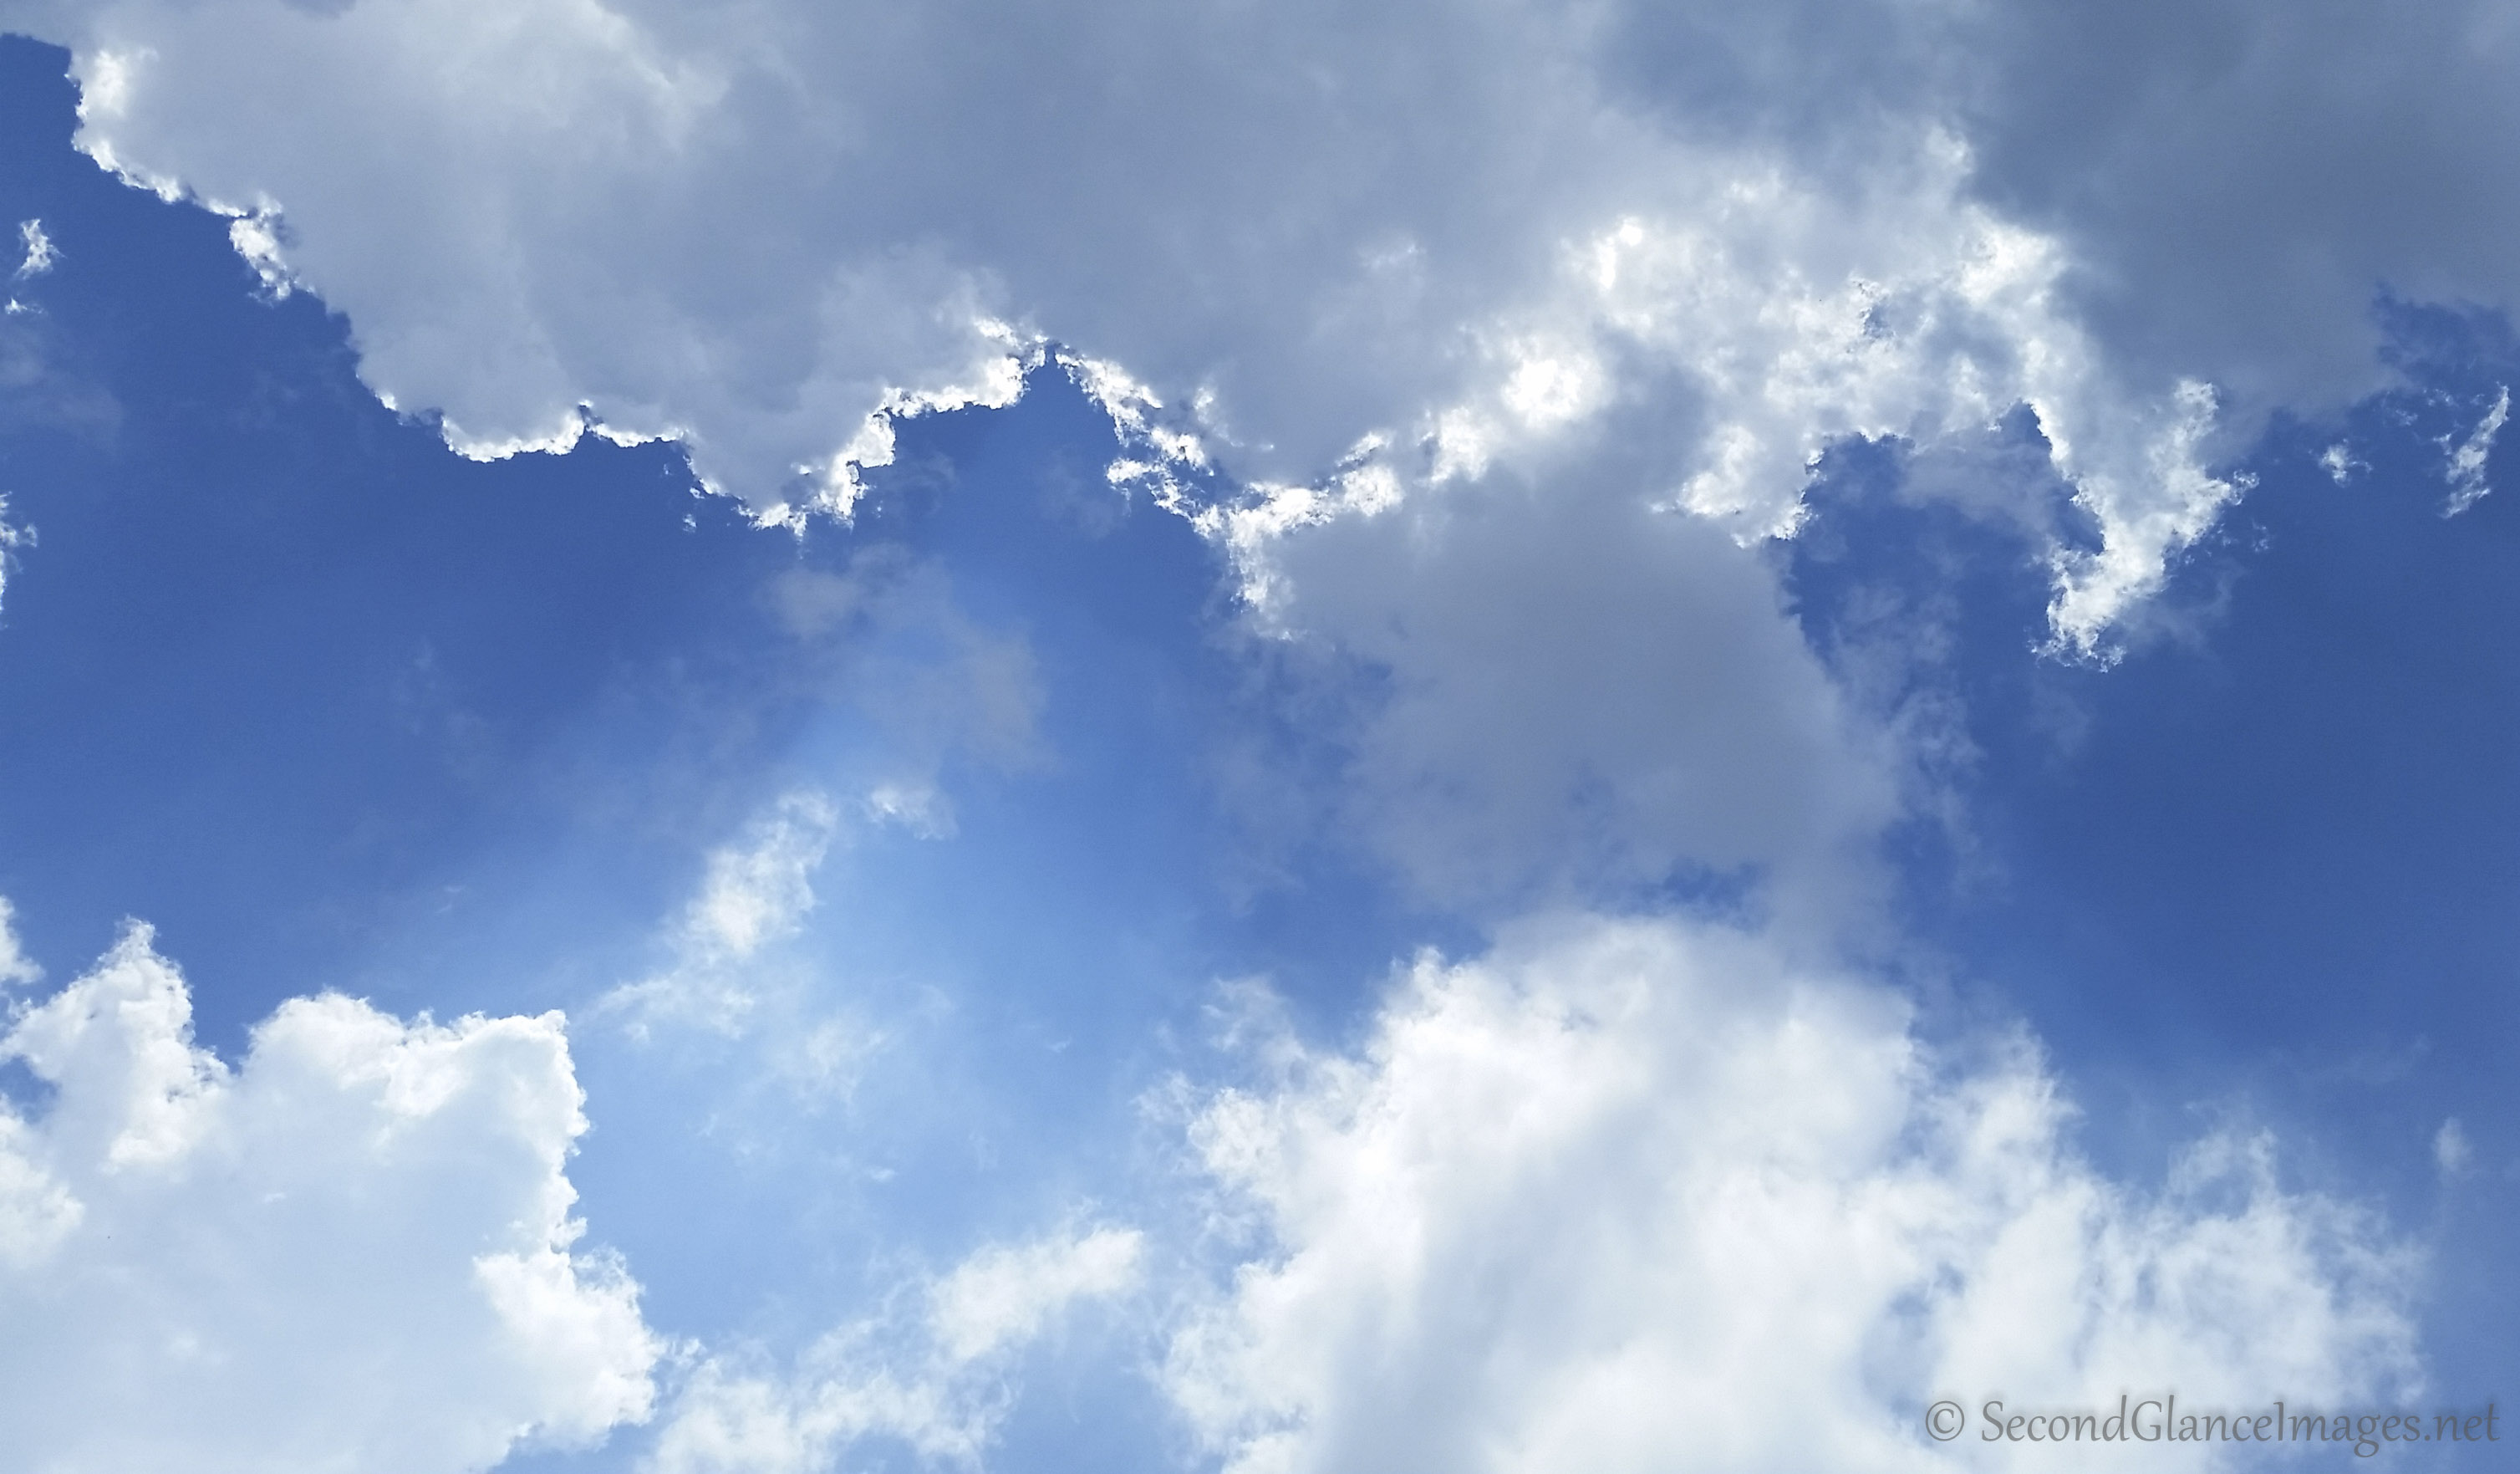 Partly cloudy skies … – Second Glance Images